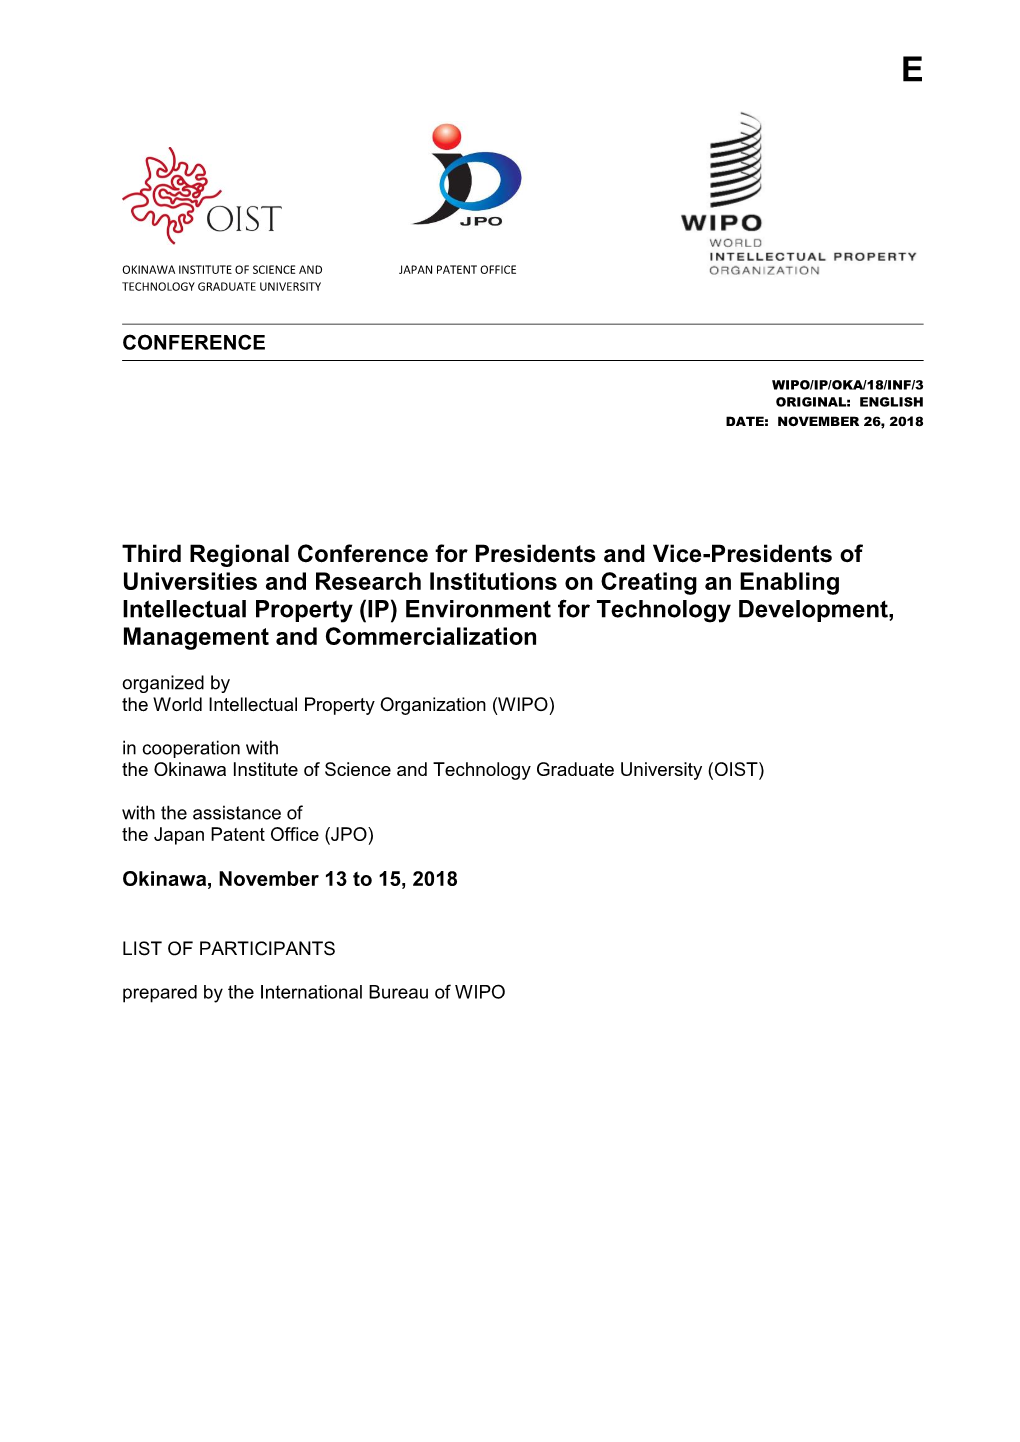 Third Regional Conference for Presidents and Vice-Presidents Of